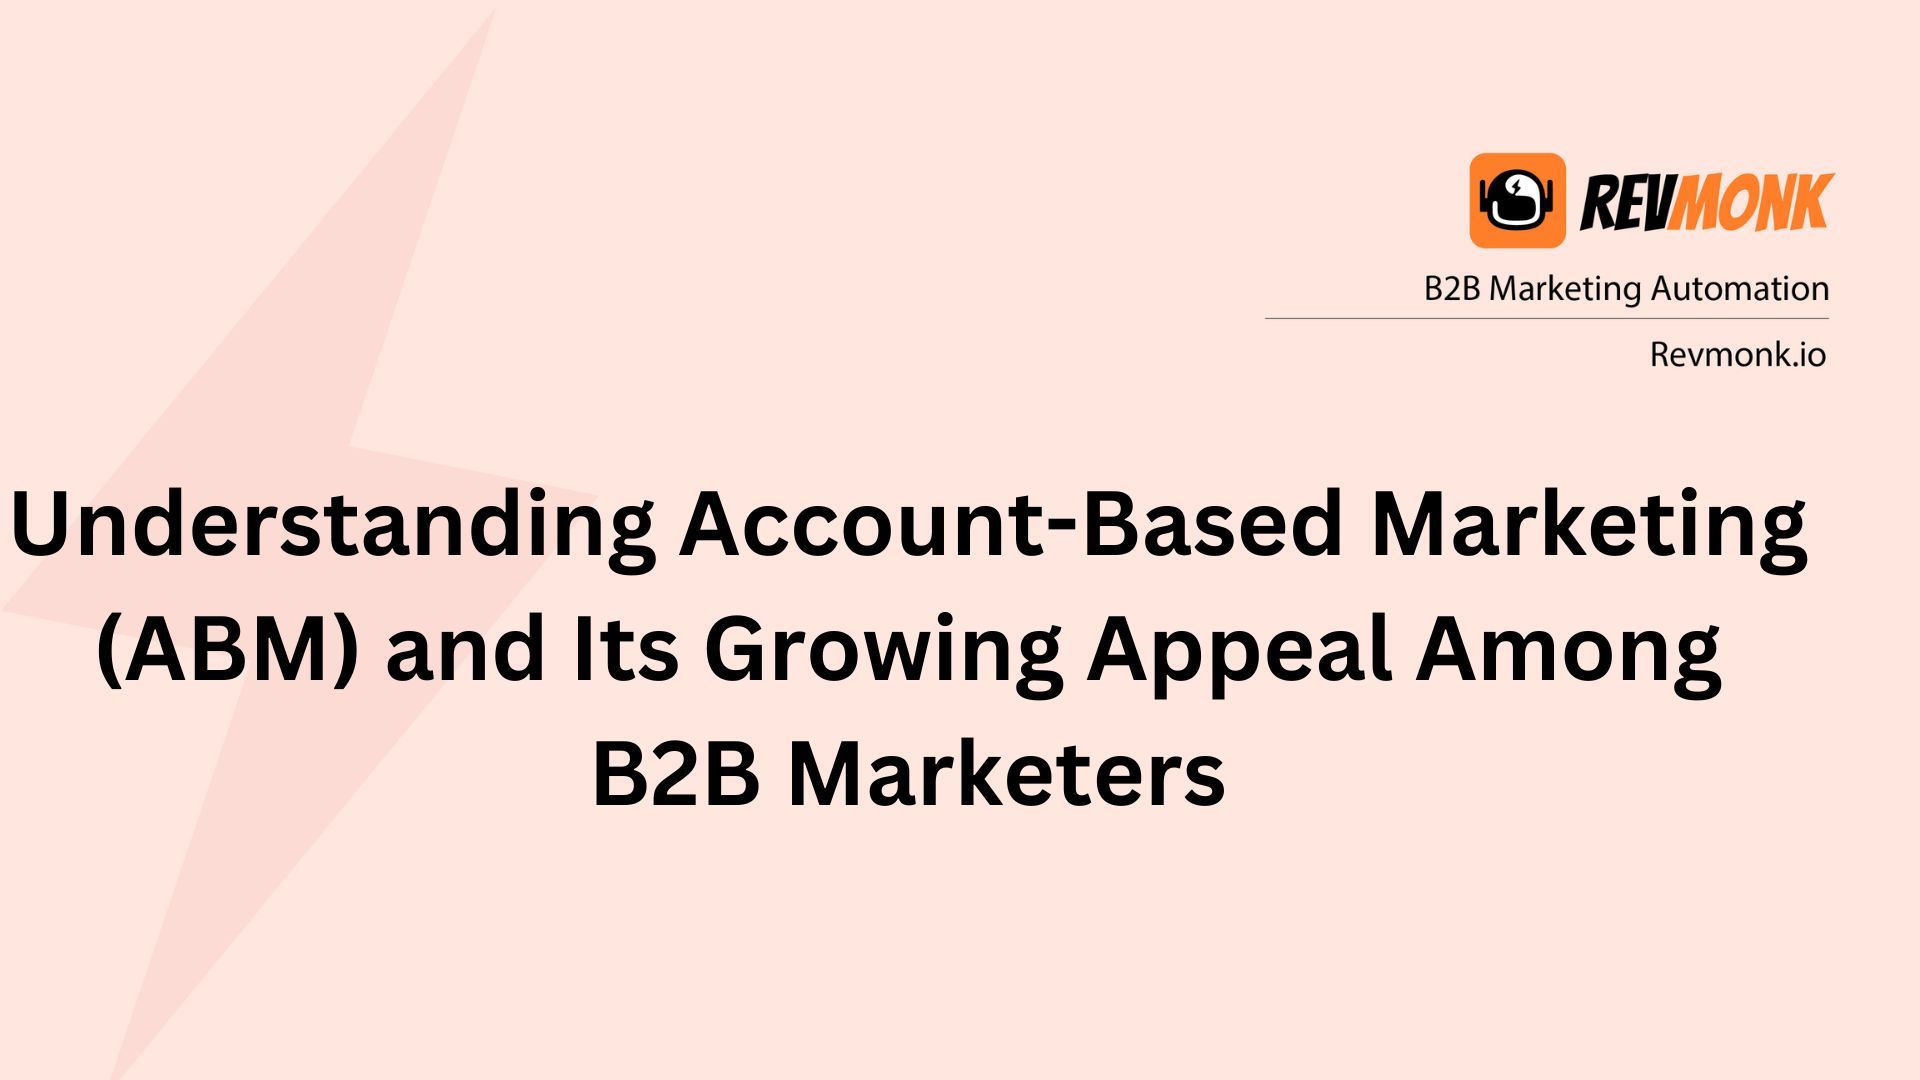 Understanding Account-Based Marketing (ABM) and Its Growing Appeal Among B2B Marketers